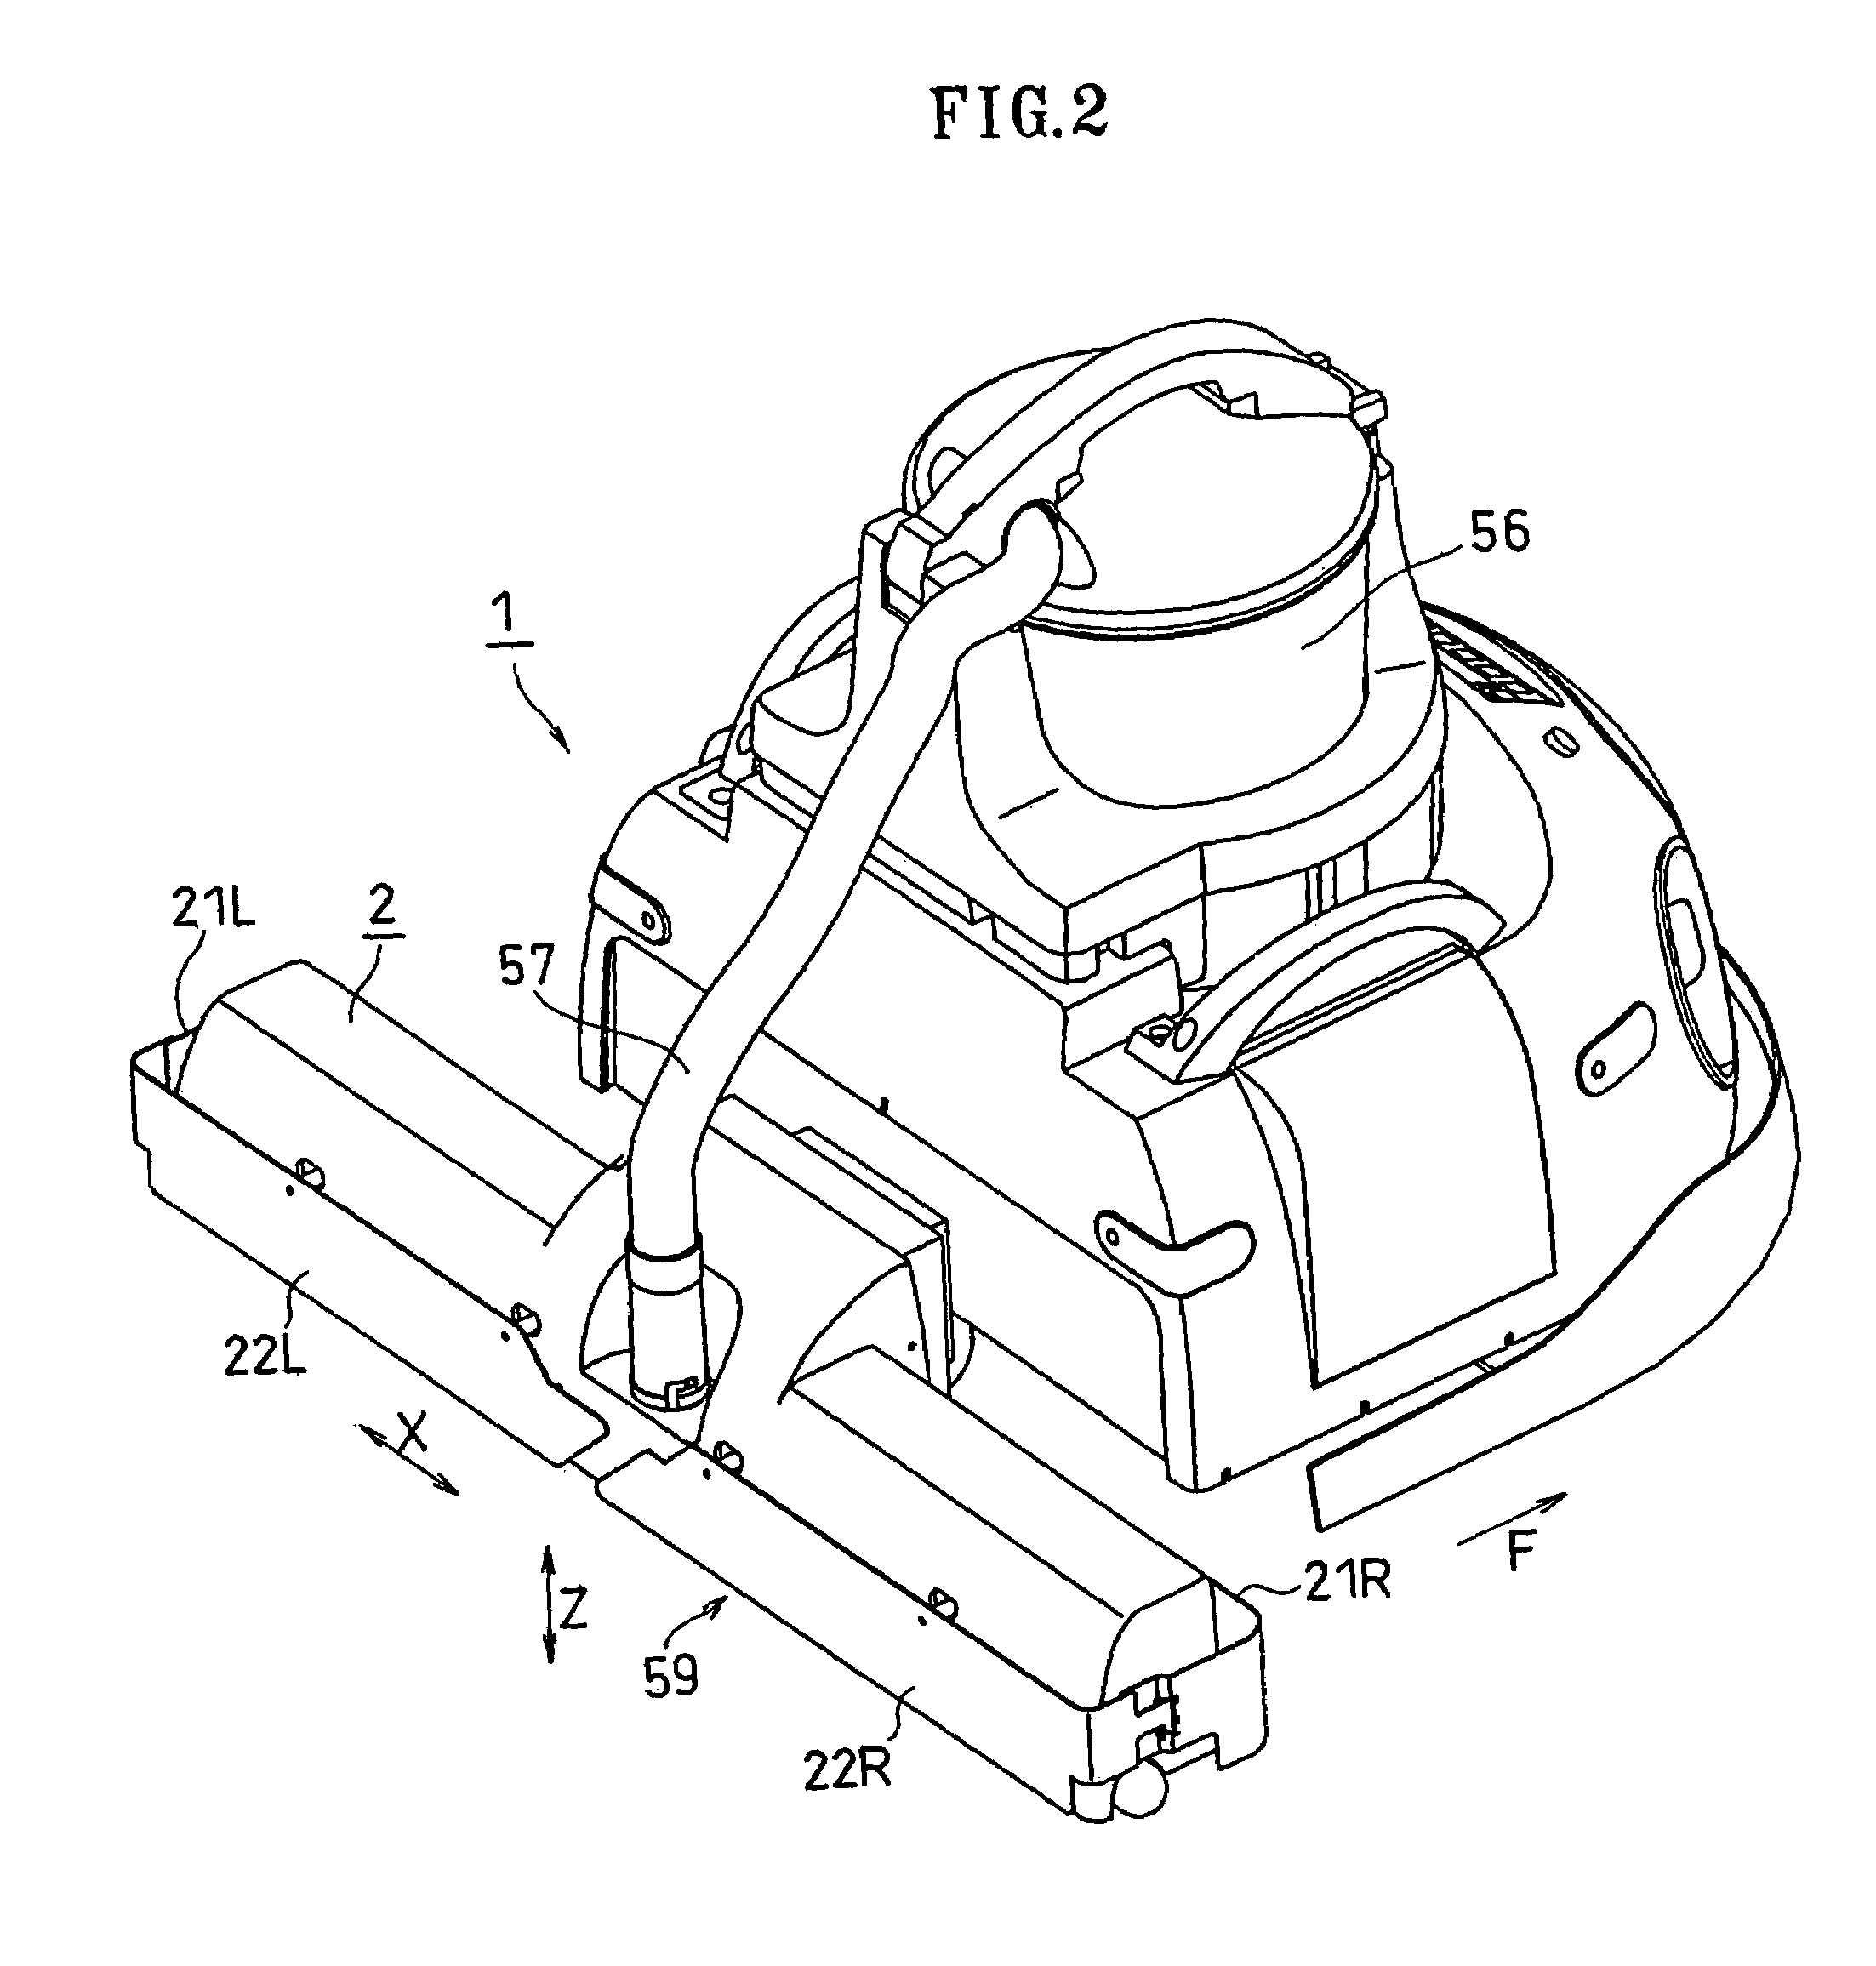 Self-propelled working robot having horizontally movable work assembly retracting in different speed based on contact sensor input on the assembly